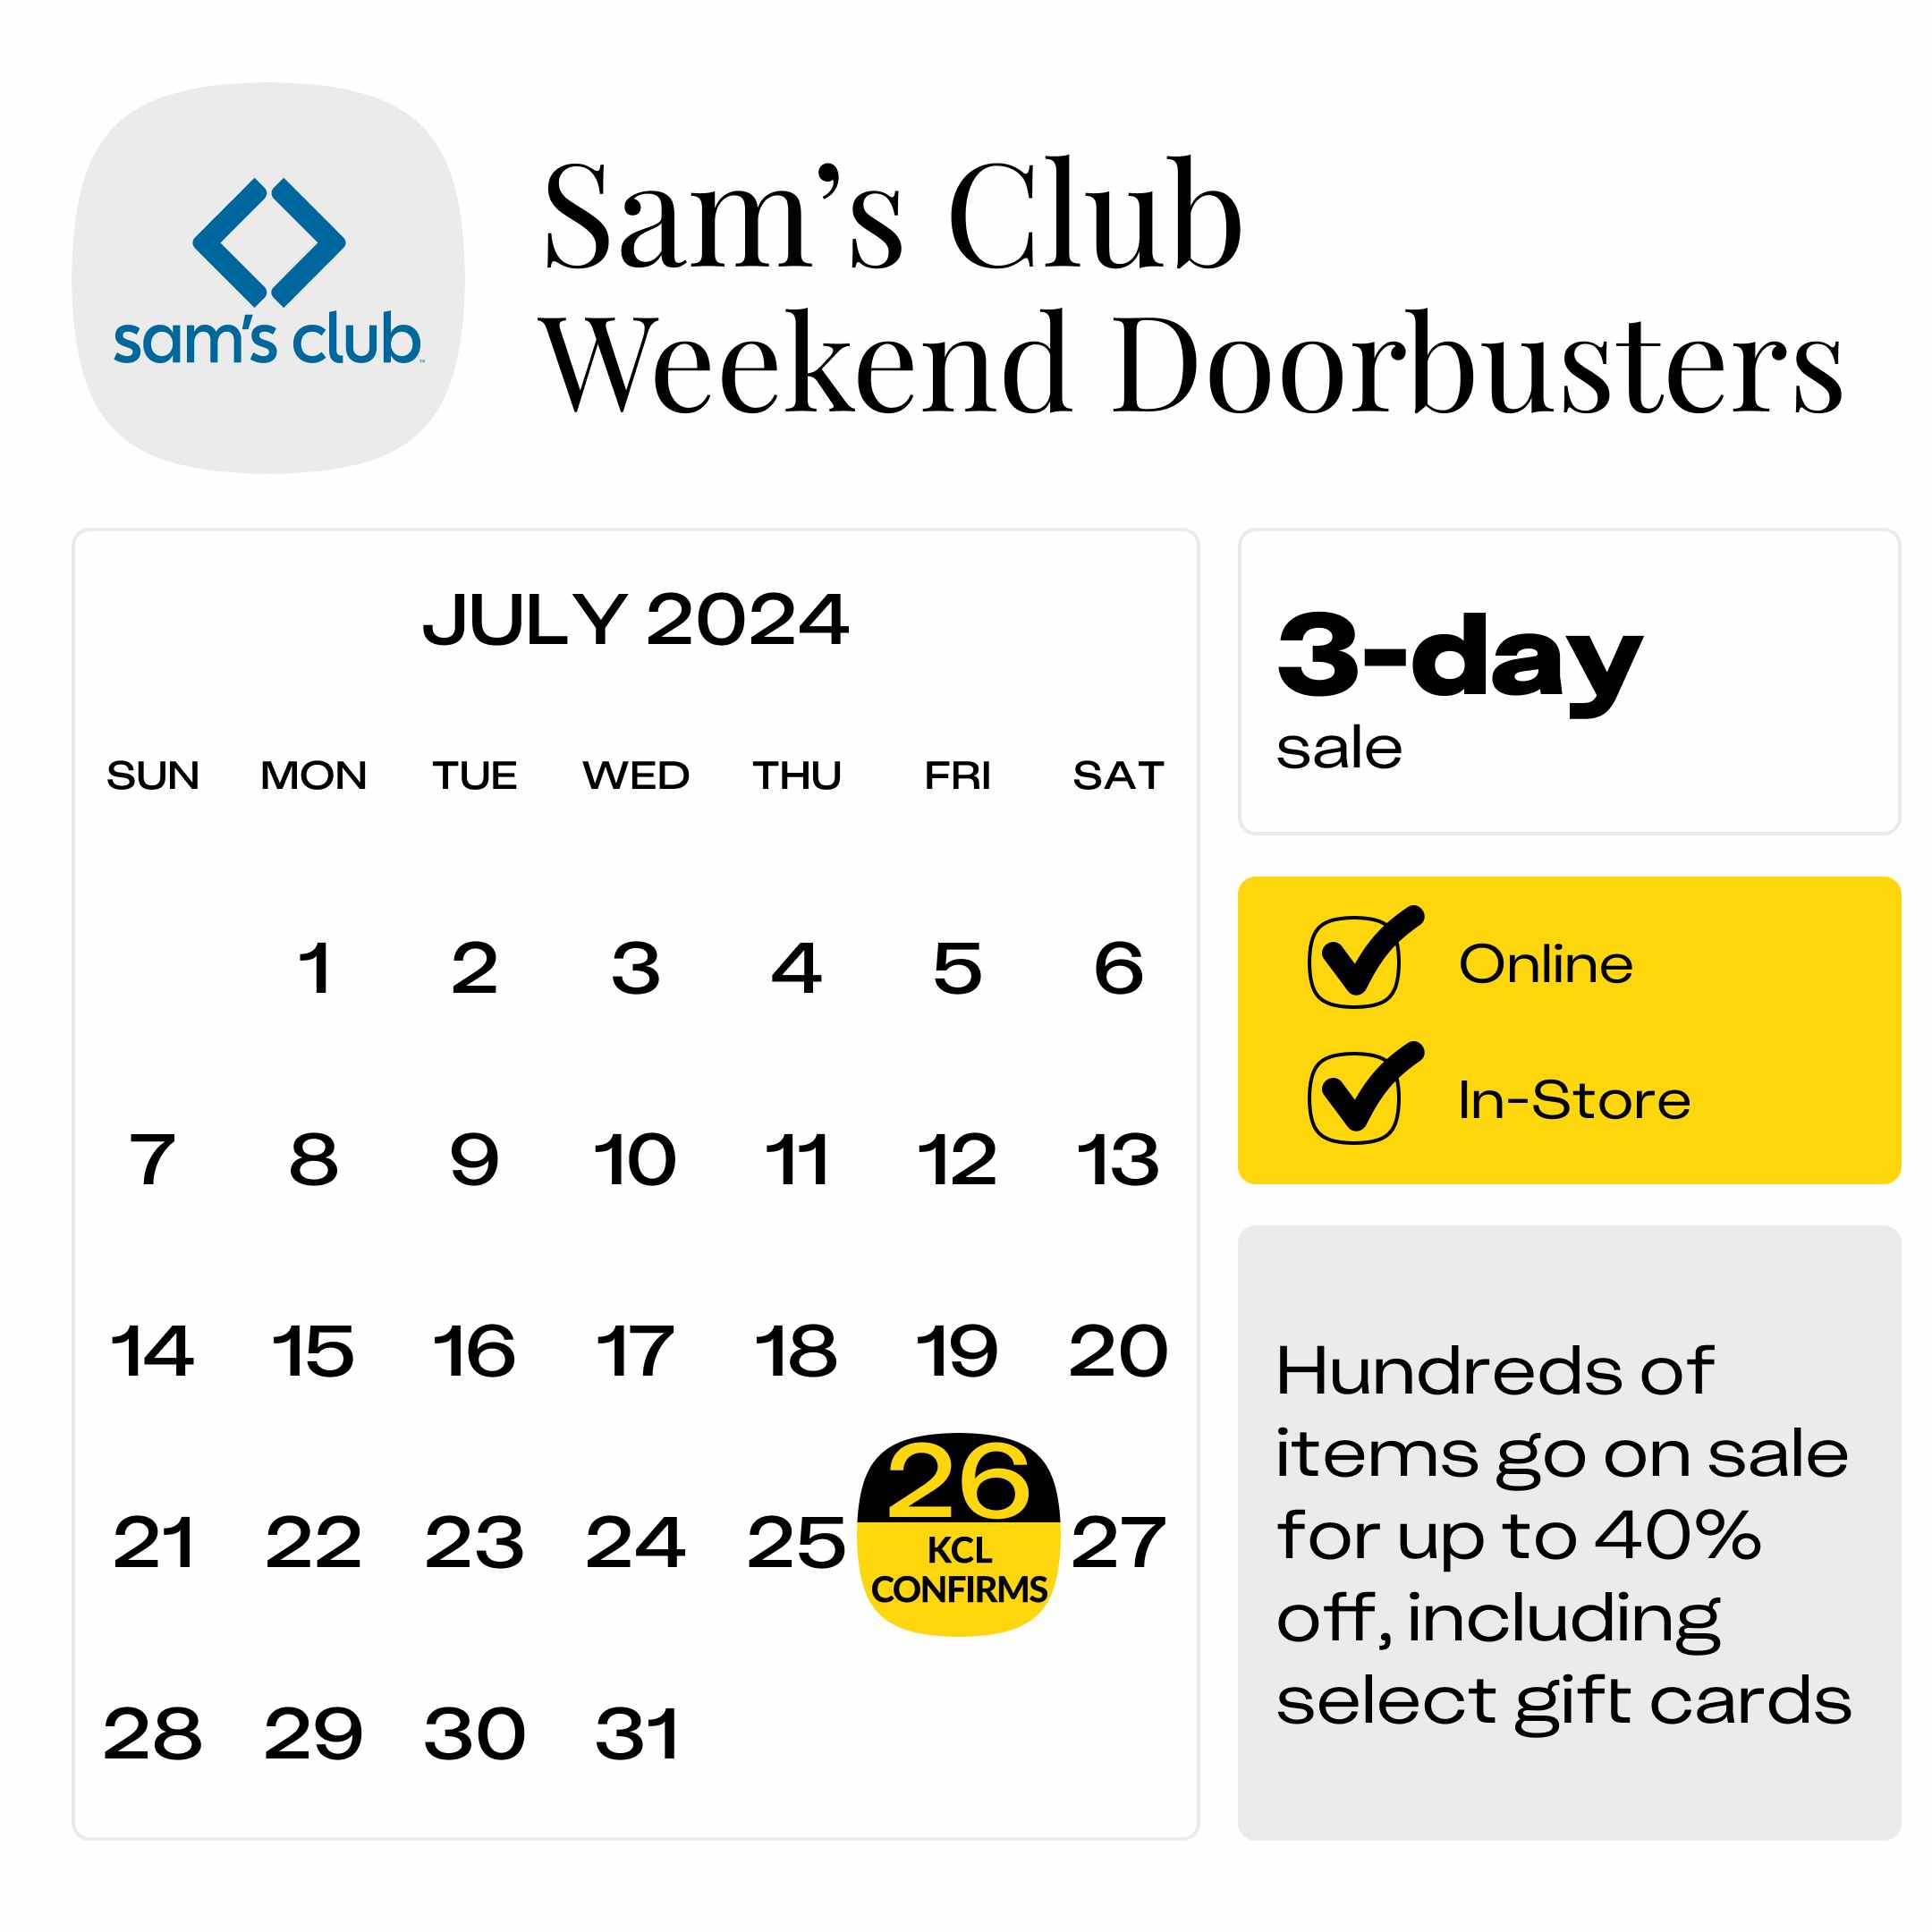 Calendar showing the confirmed start date for the three-day Sam's Club Doorbusters event as July 26, 2024.